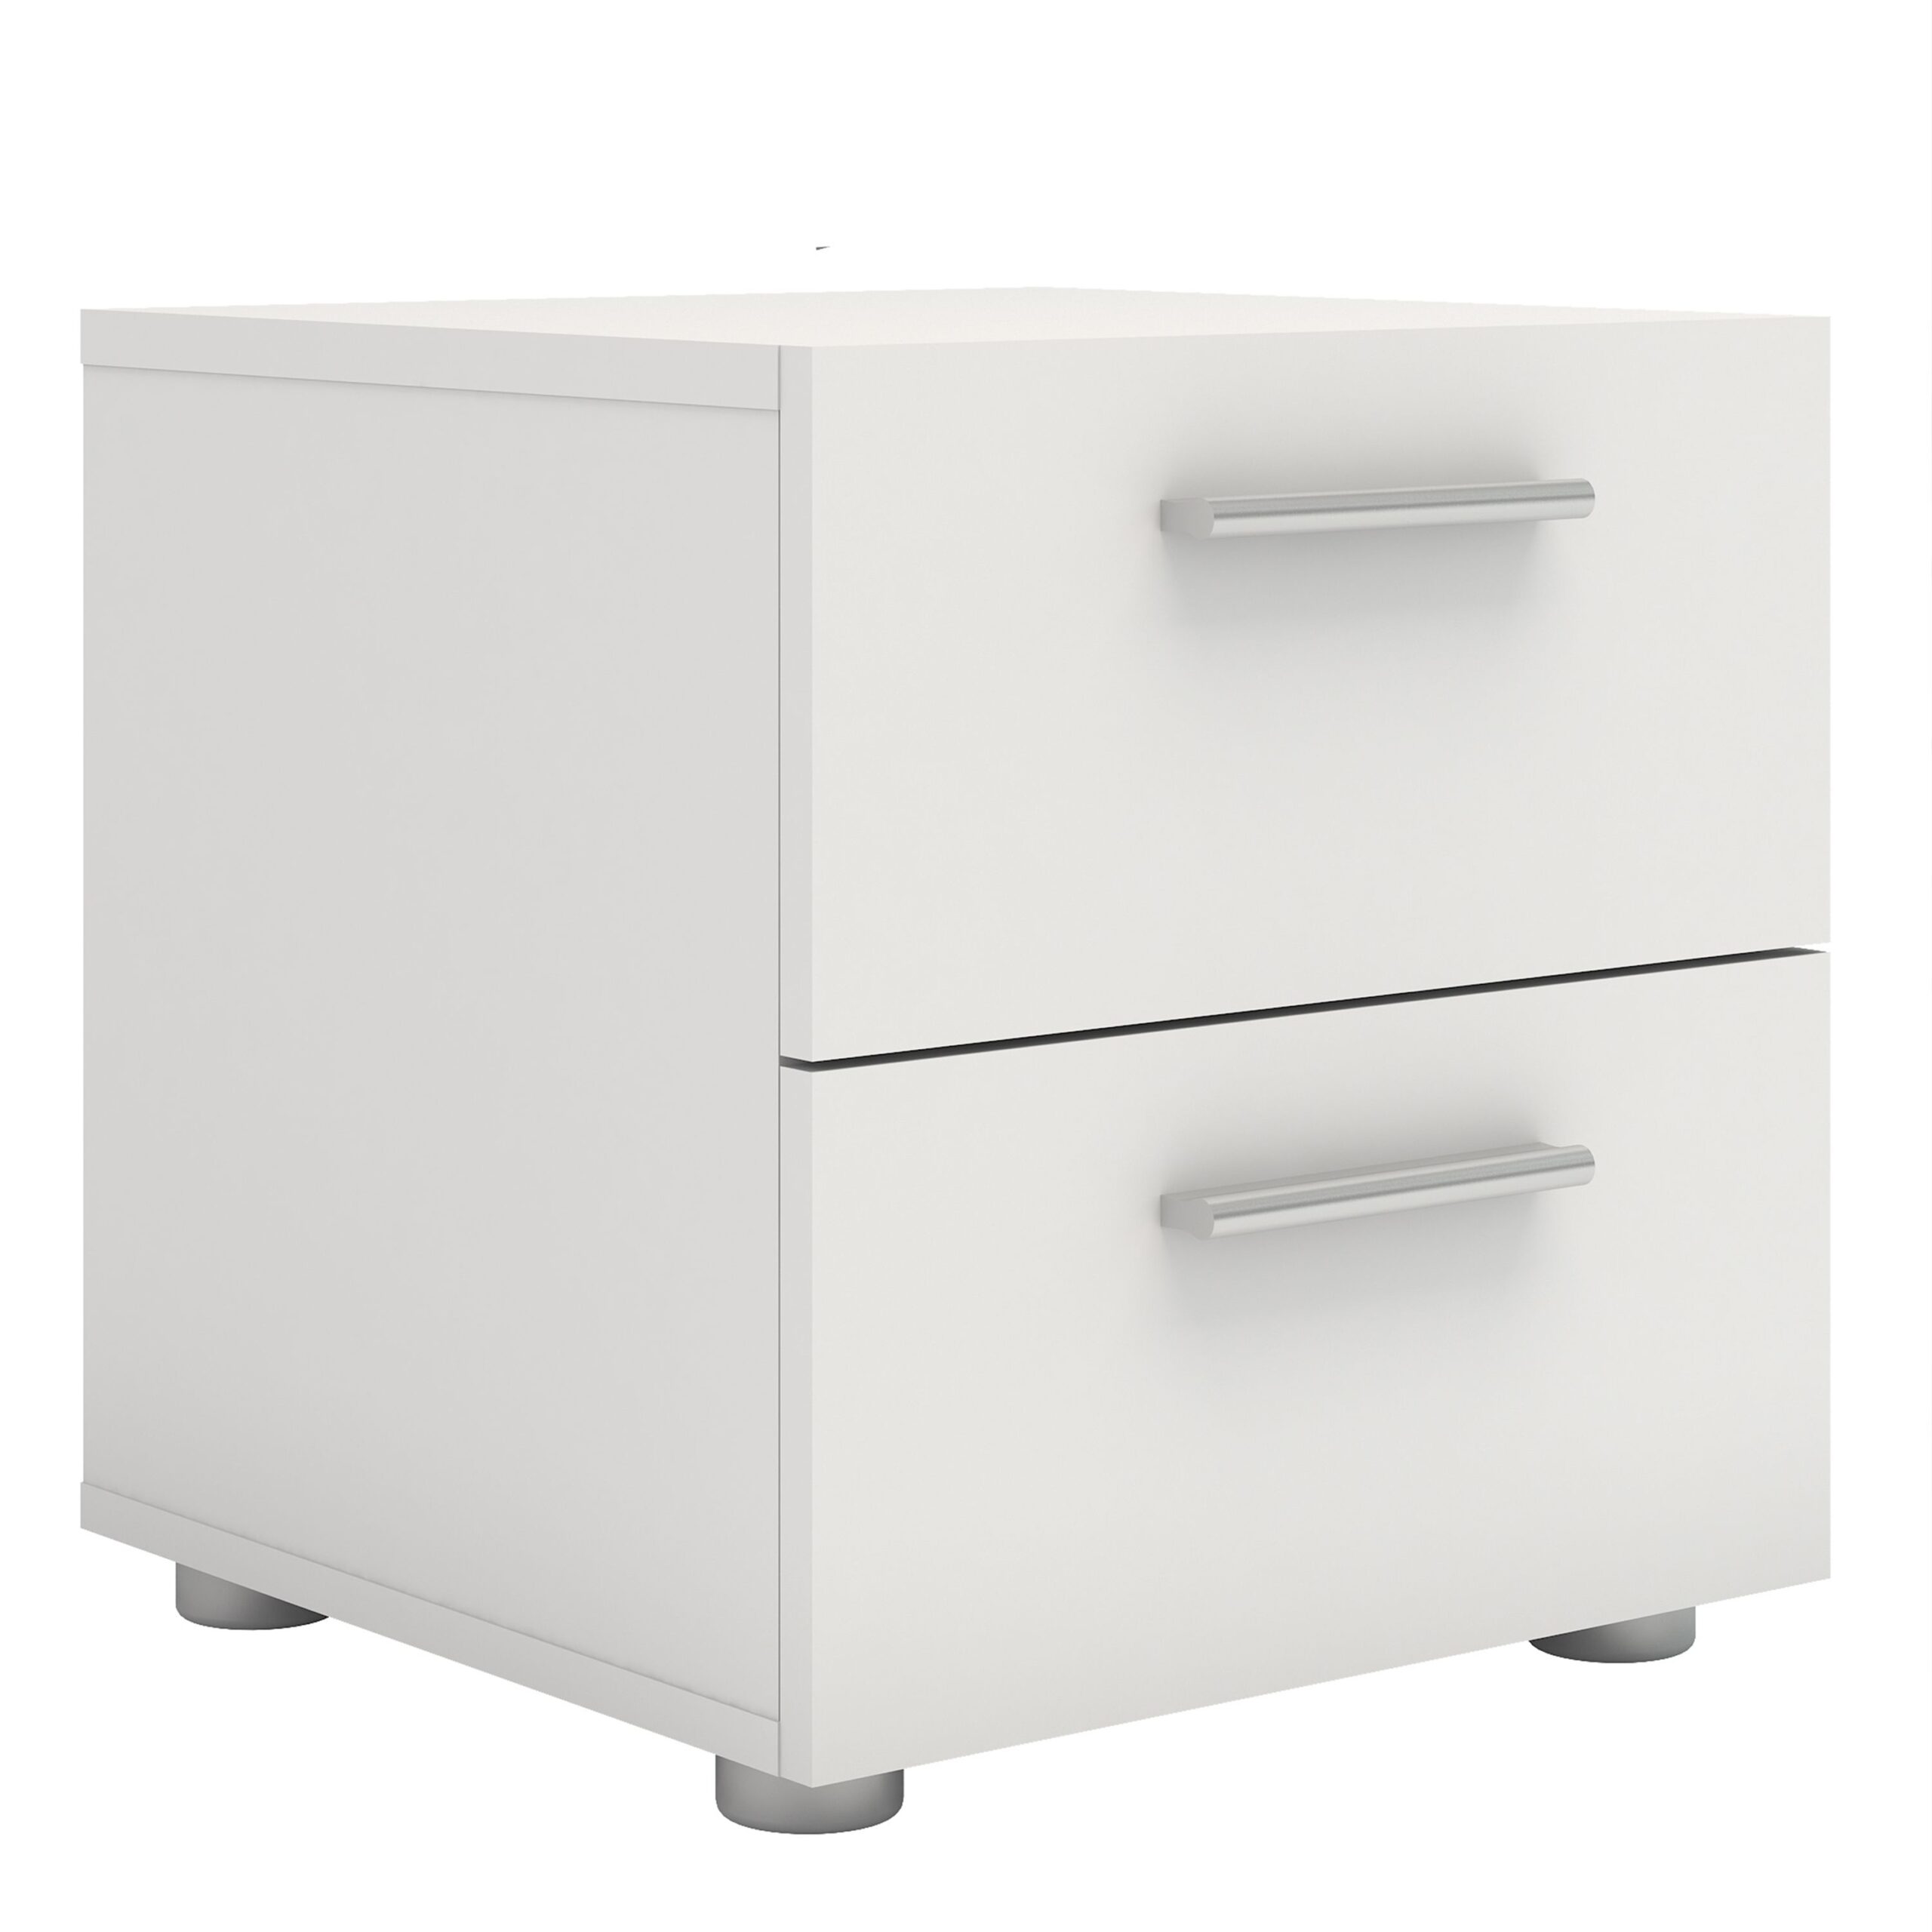 Peepo Bedside 2 Drawers In White